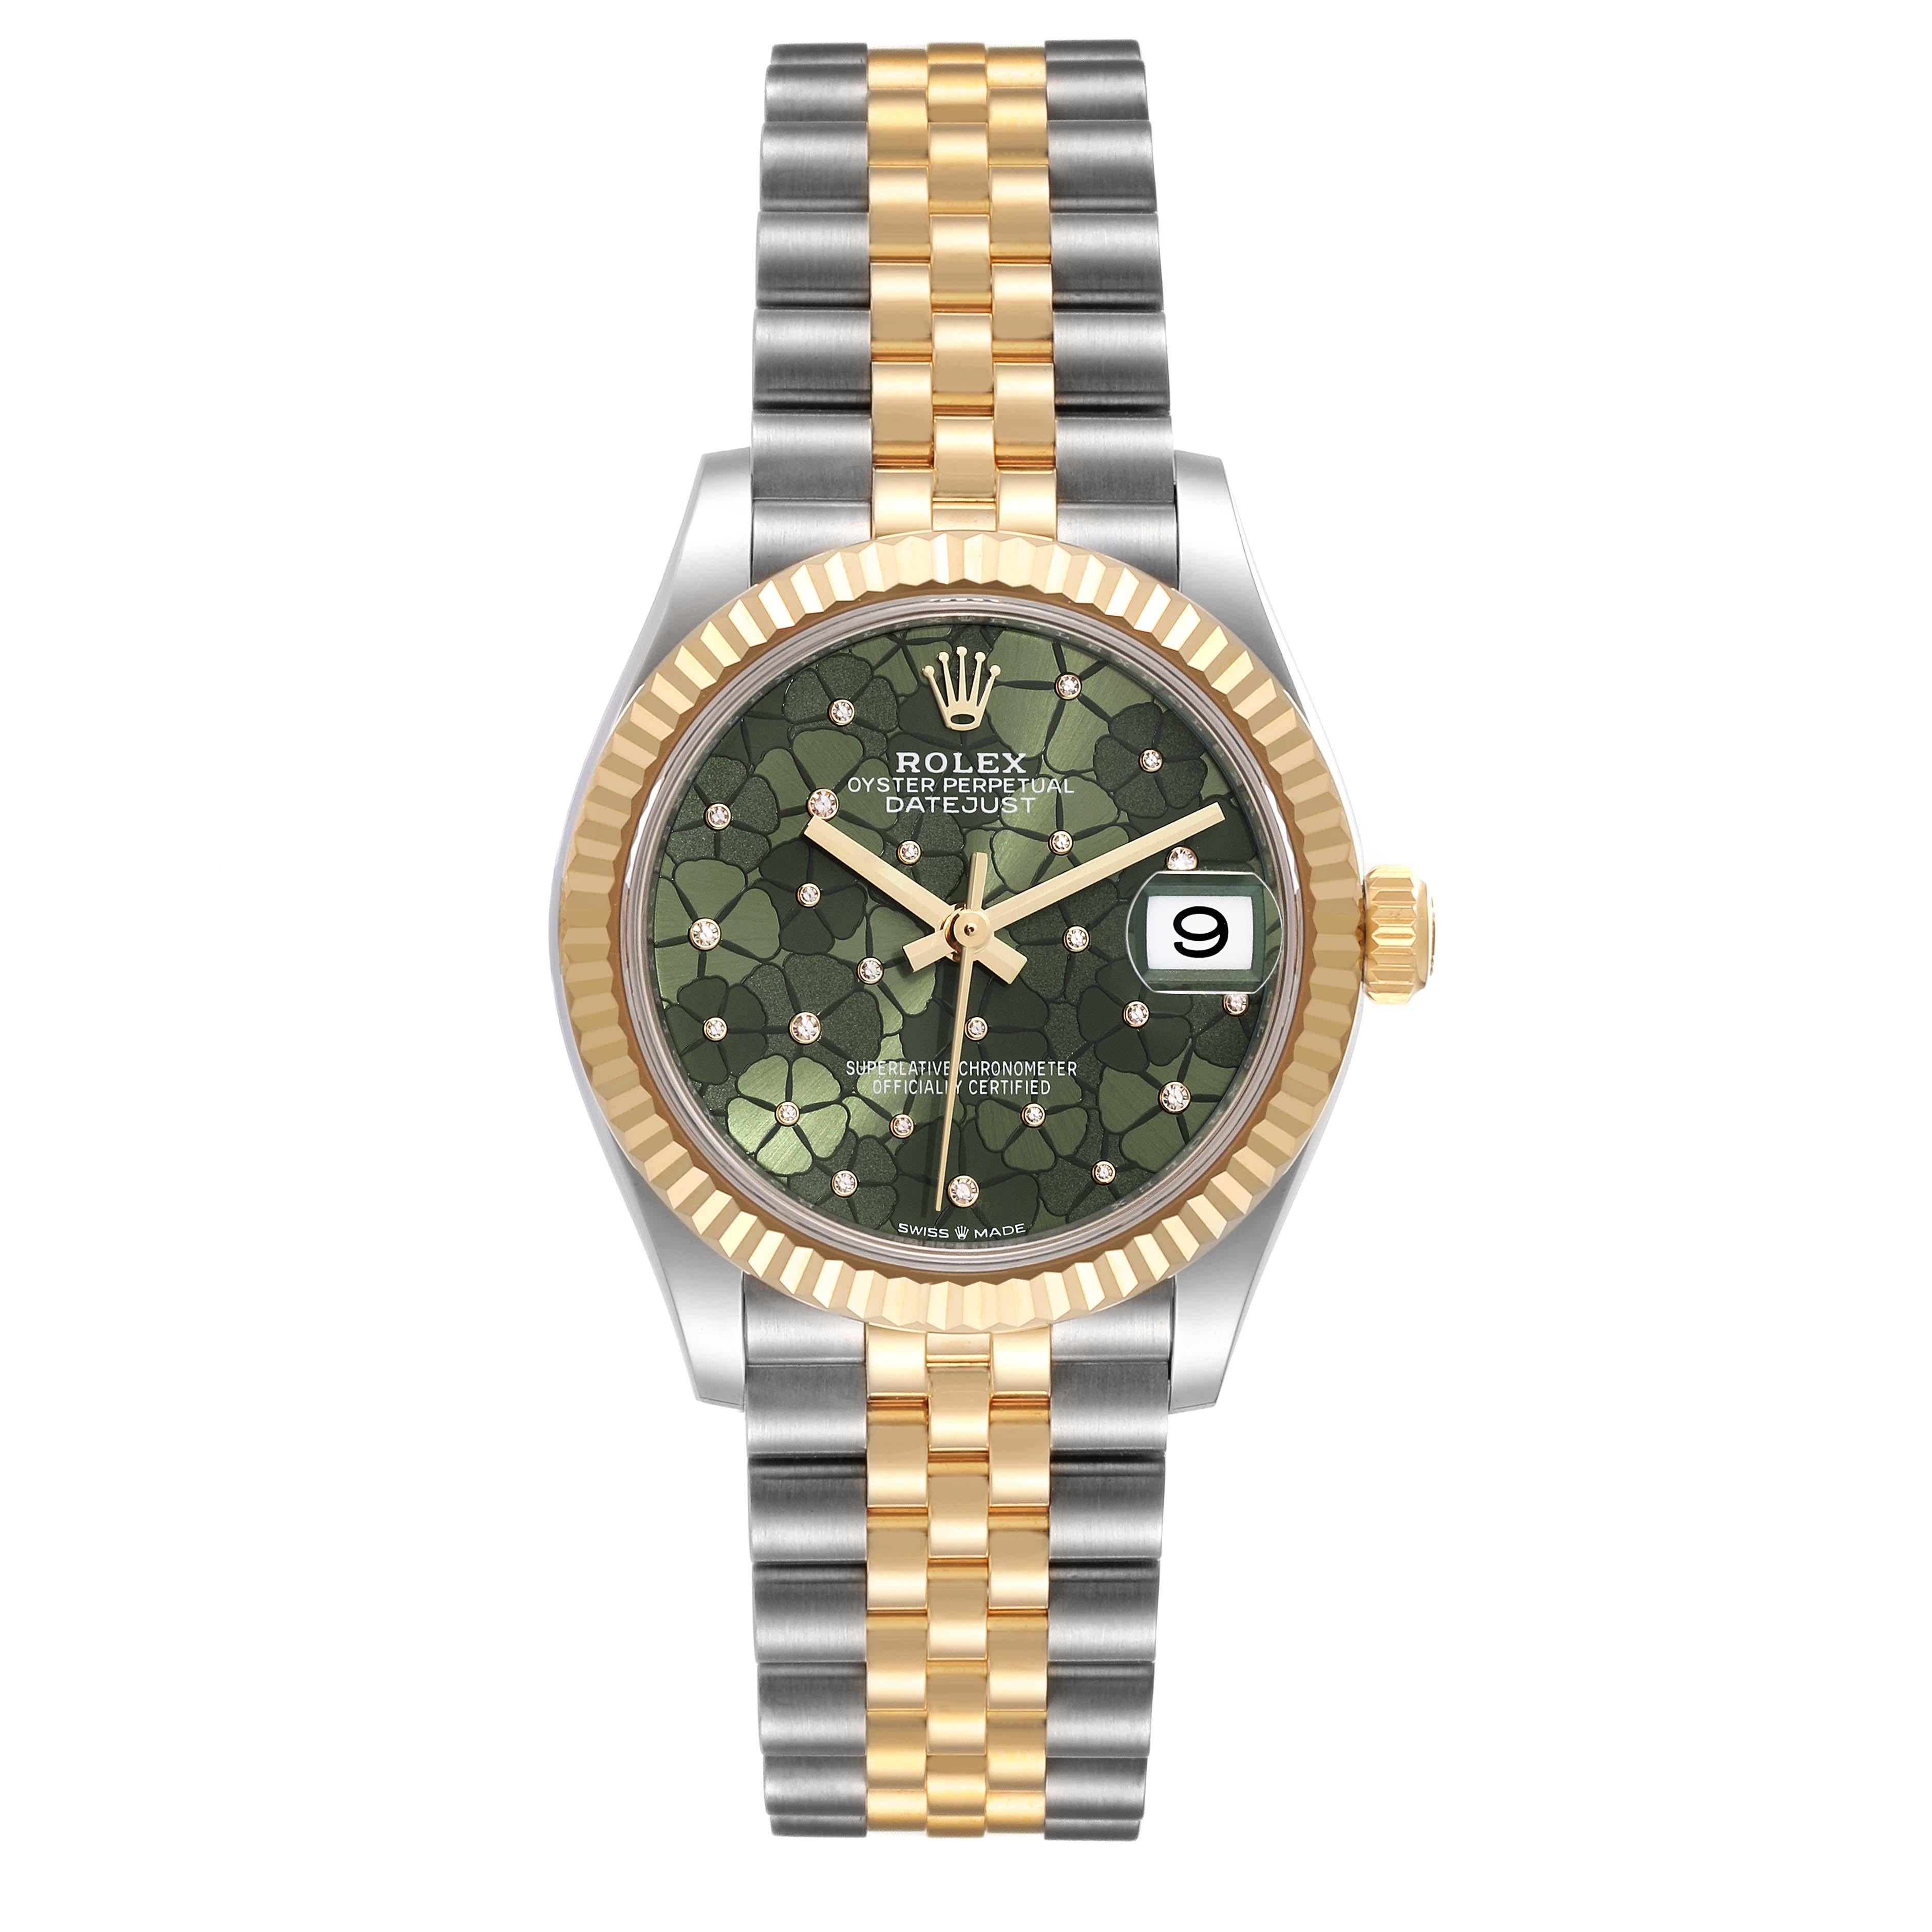 Rolex Datejust Midsize Steel Yellow Gold Diamond Dial Ladies Watch 278273 Unworn. Officially certified chronometer automatic self-winding movement. Stainless steel oyster case 31.0 mm in diameter. Rolex logo on 18K yellow gold crown. 18k yellow gold